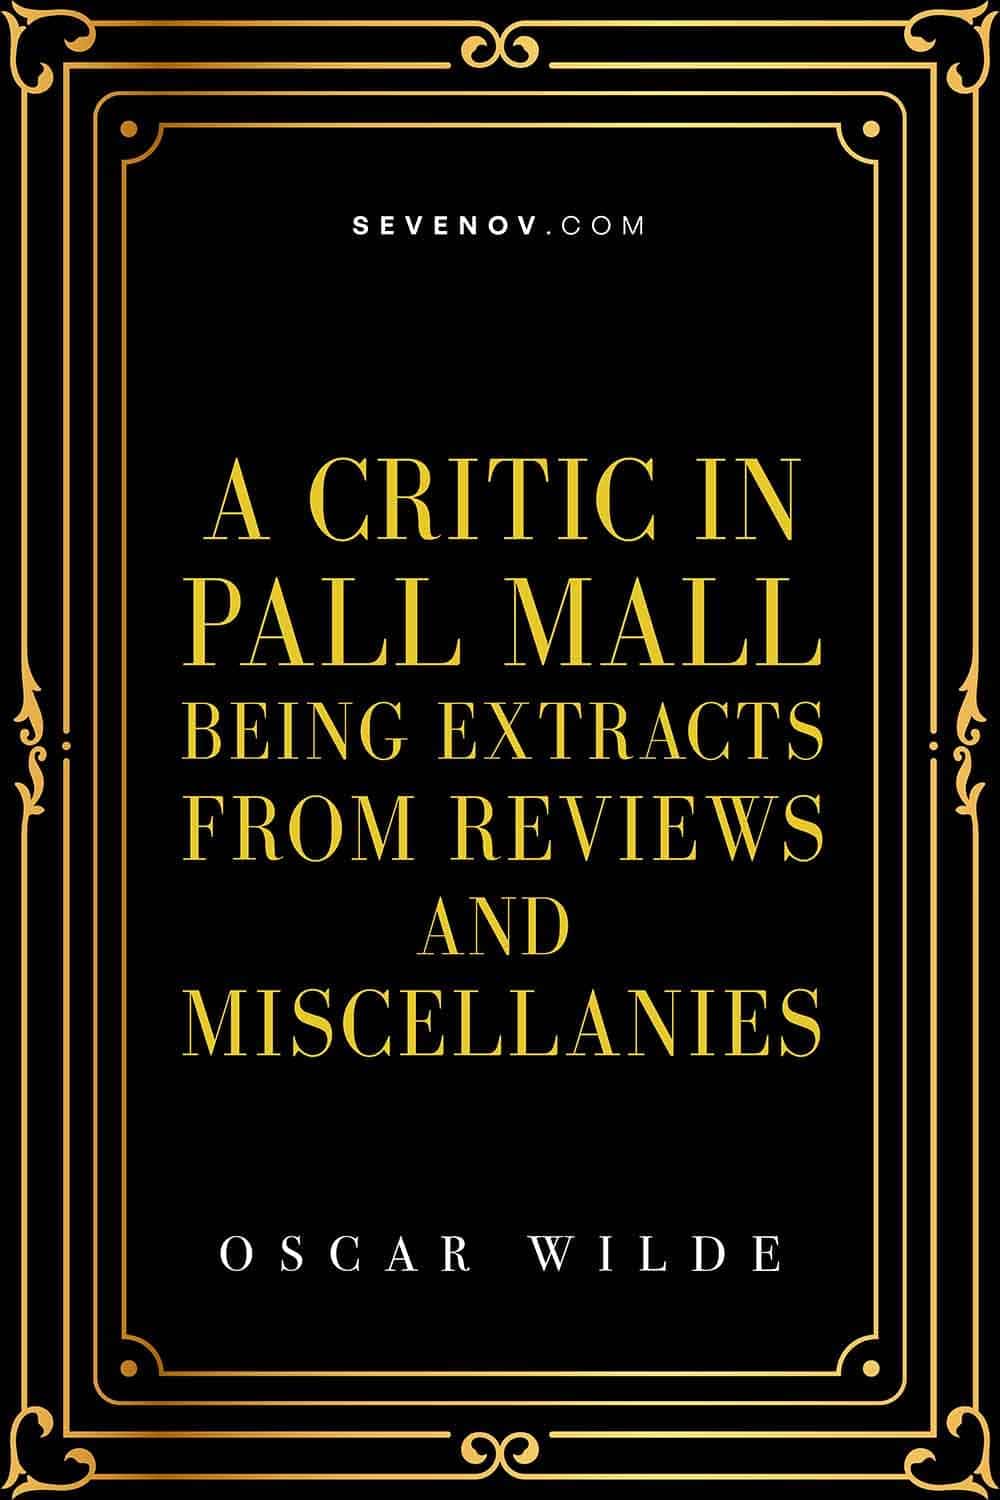 https://pagevio.com/wp-content/uploads/2023/01/a-critic-in-pall-mall-being-extracts-from-reviews-and-miscellanies-20220826.jpg